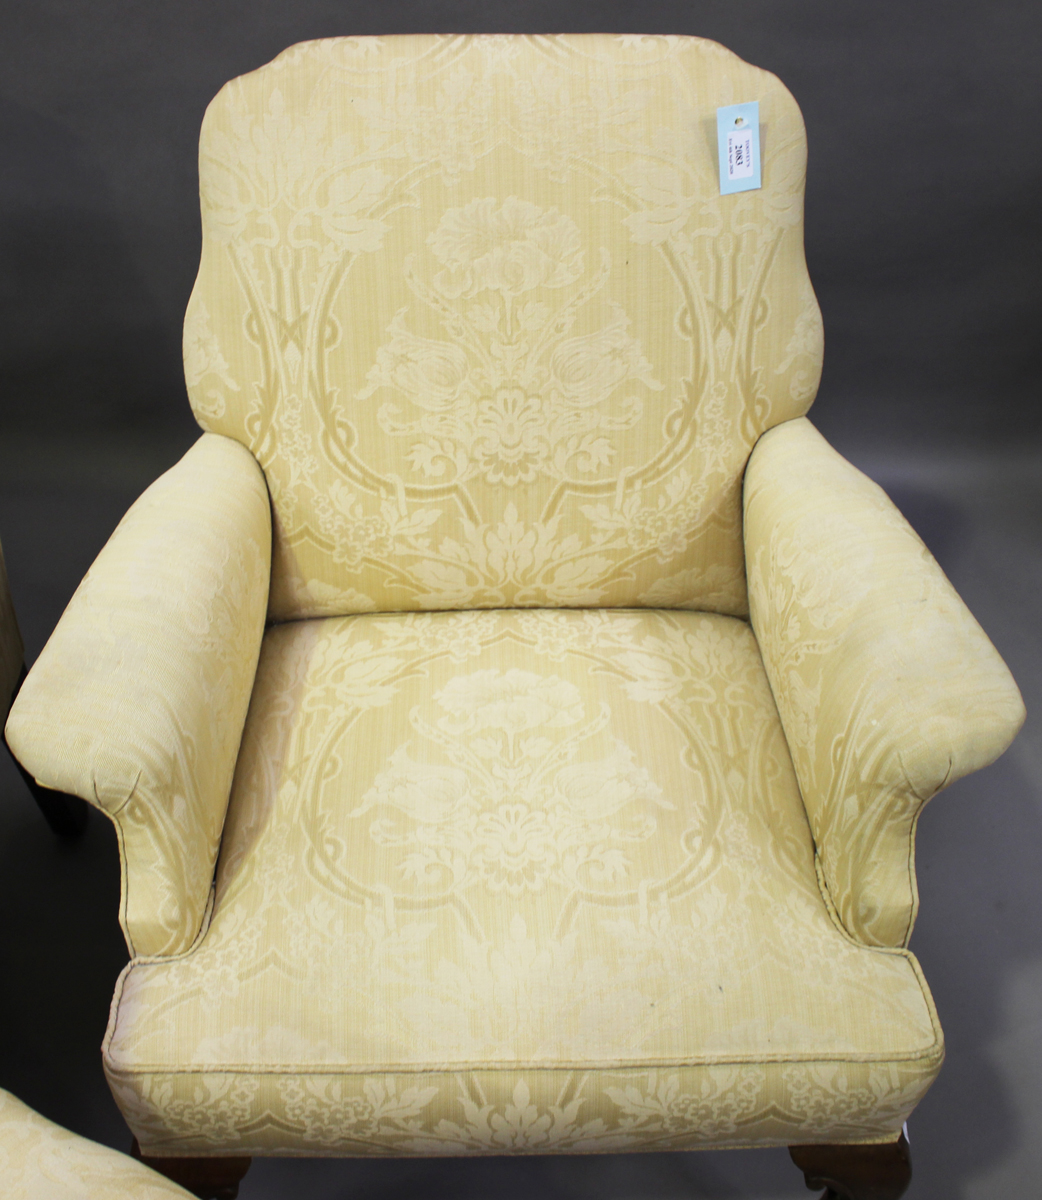 A set of three early 20th century Queen Anne style scroll armchairs, upholstered in patterned yellow - Image 2 of 2